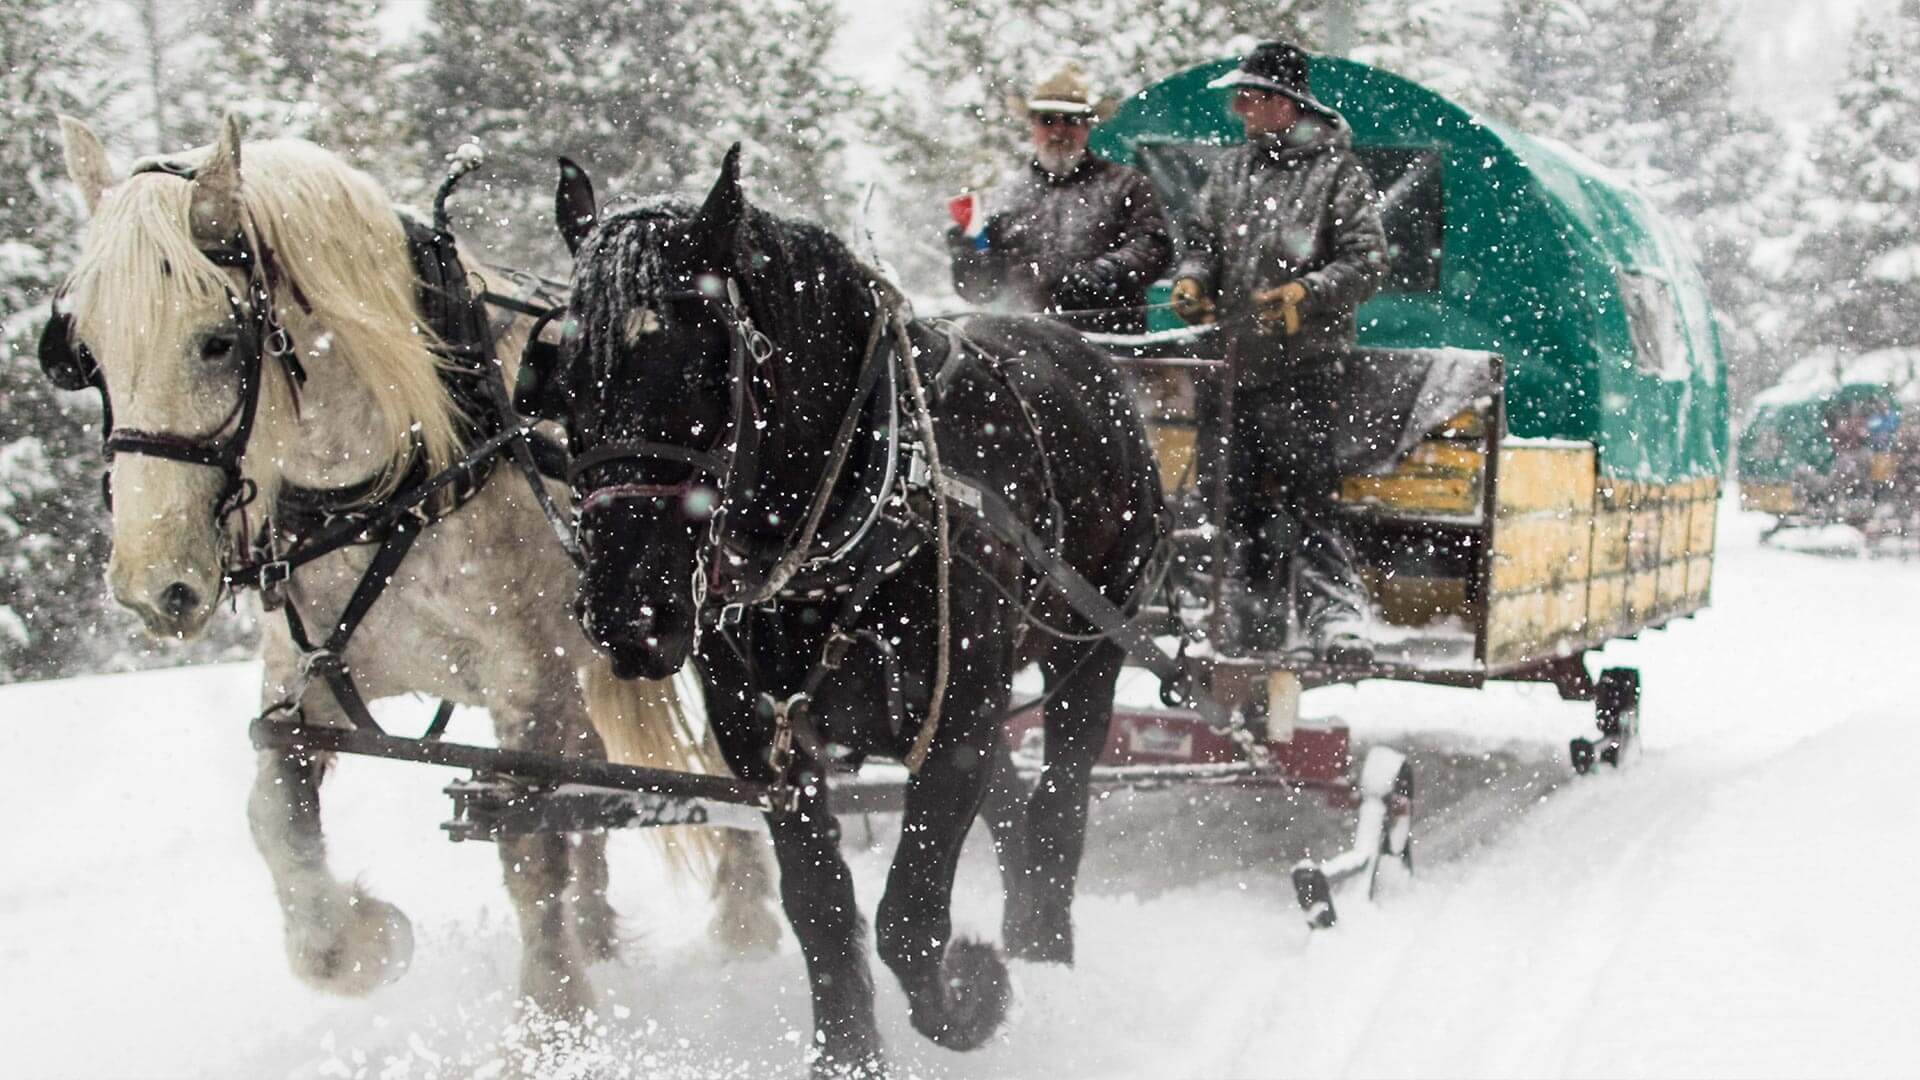 Horse-drawn sleigh being pulled in Big Sky, Montana